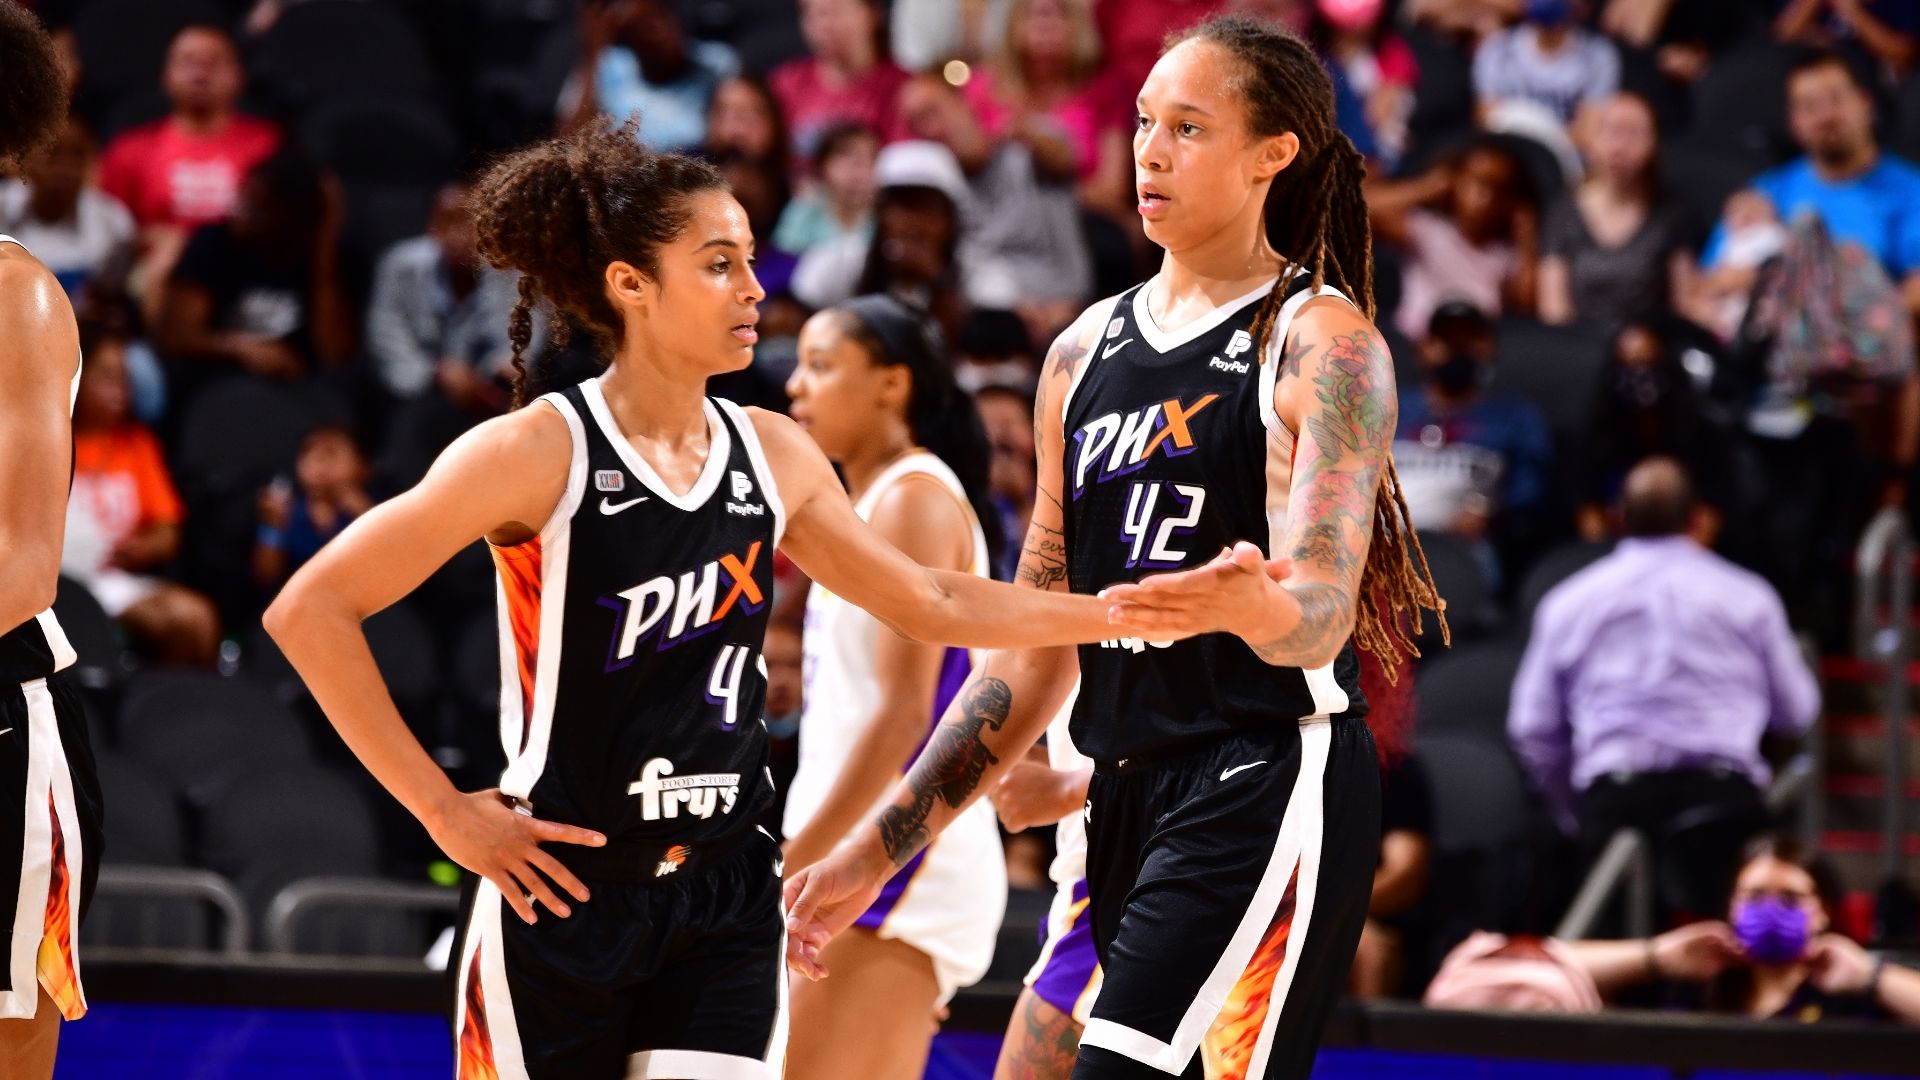 &quot;I think about her every day&quot;: Skylar Diggins-Smith on Brittney Griner